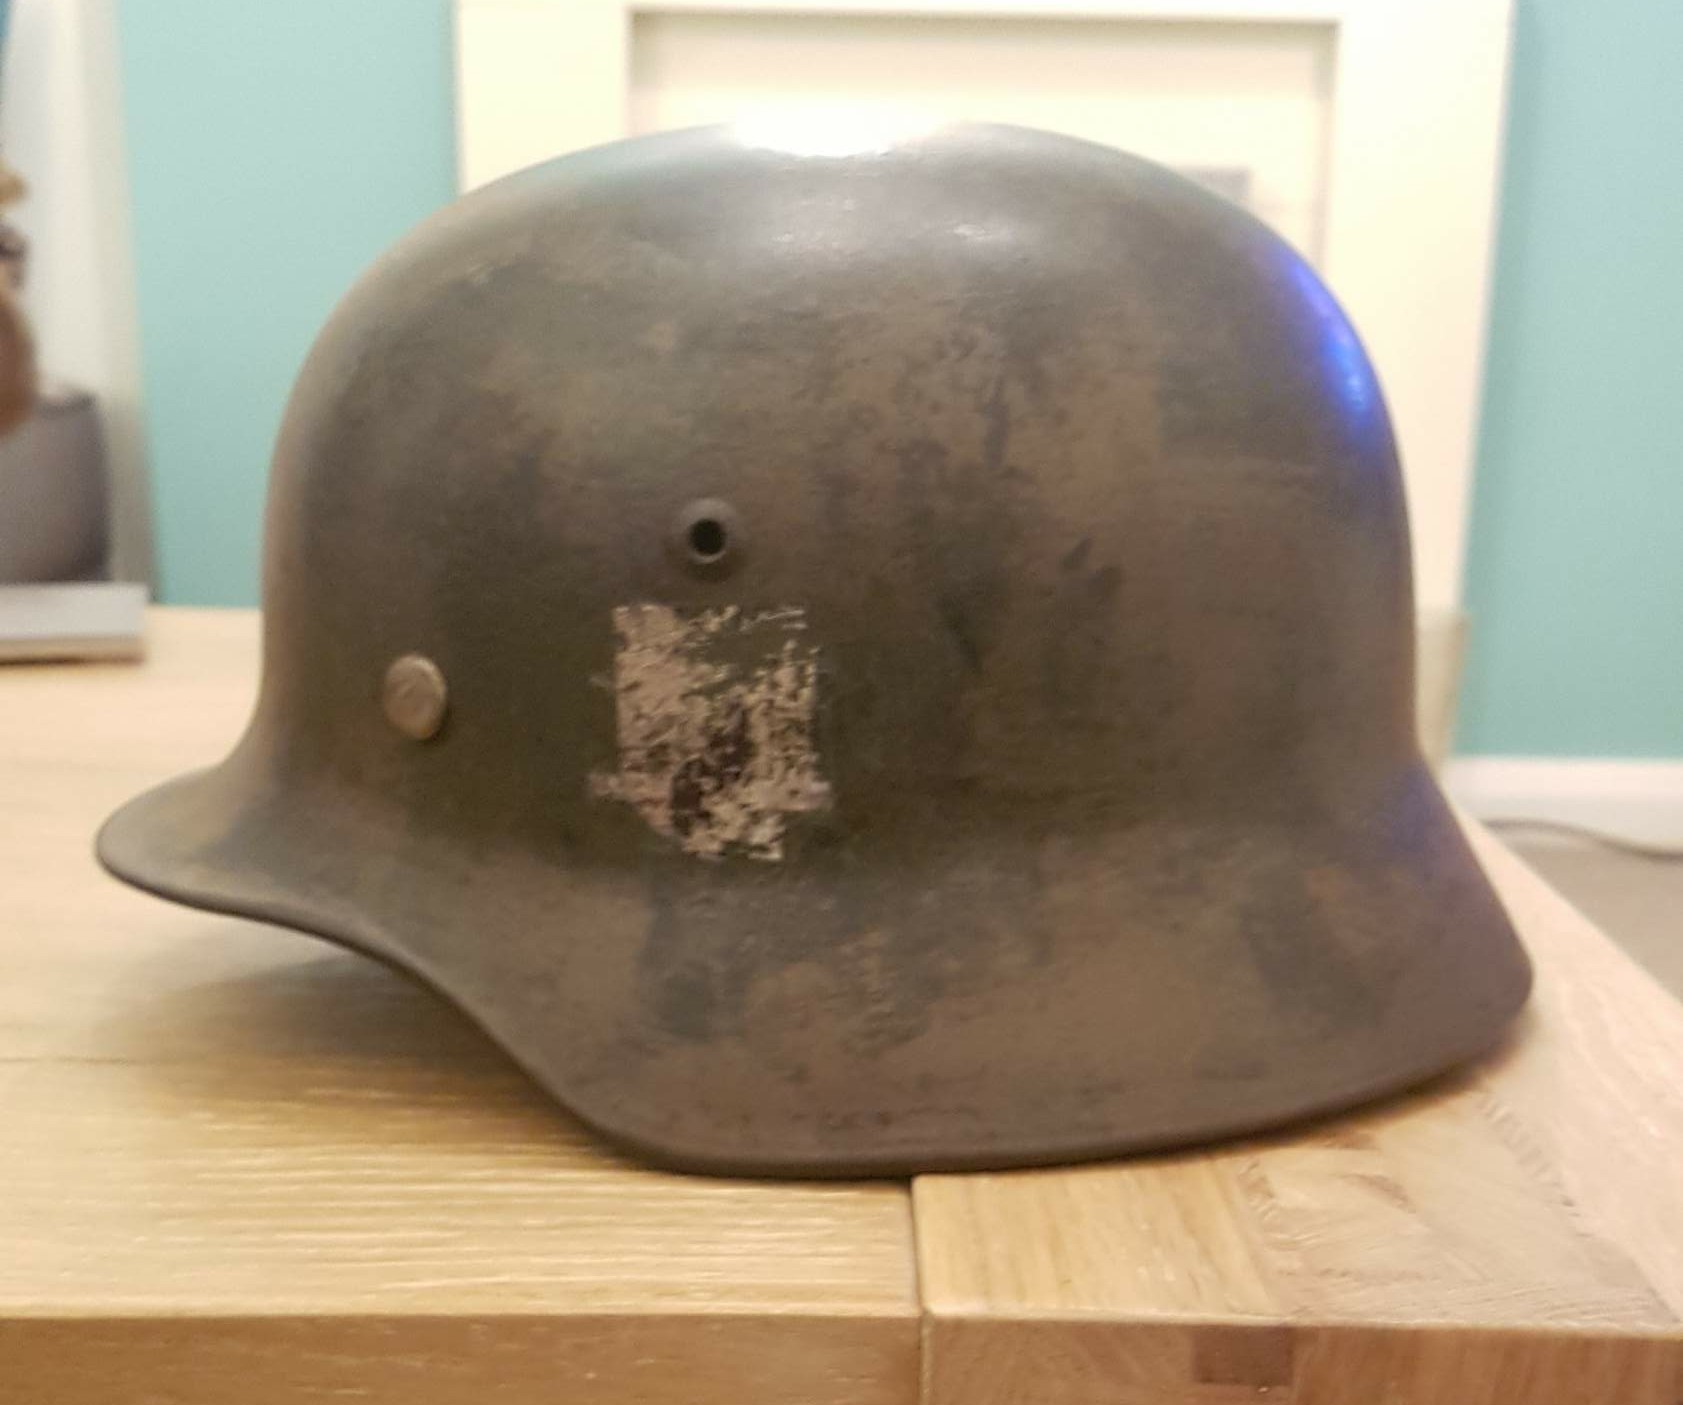 How to spot a fake german helmet images